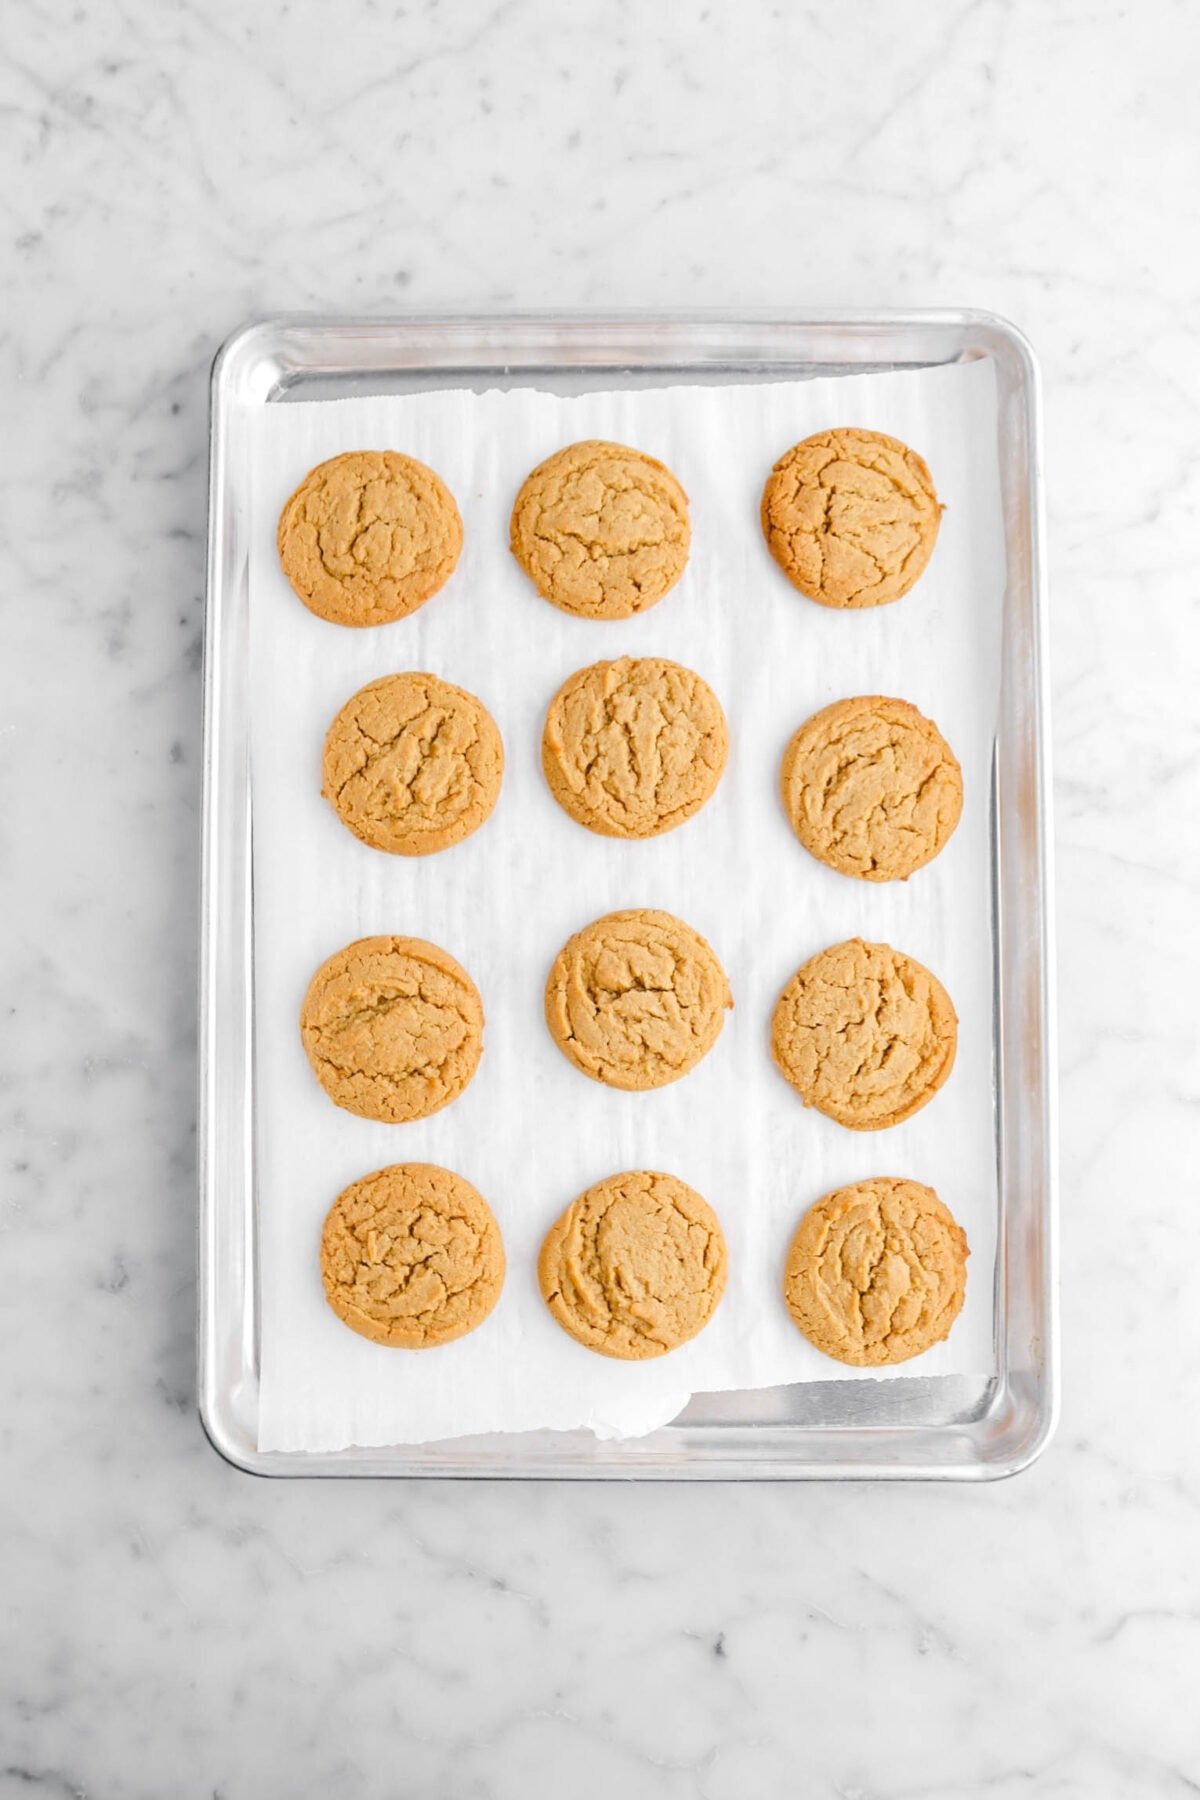 12 baked peanut butter cookies on lined sheet pan.